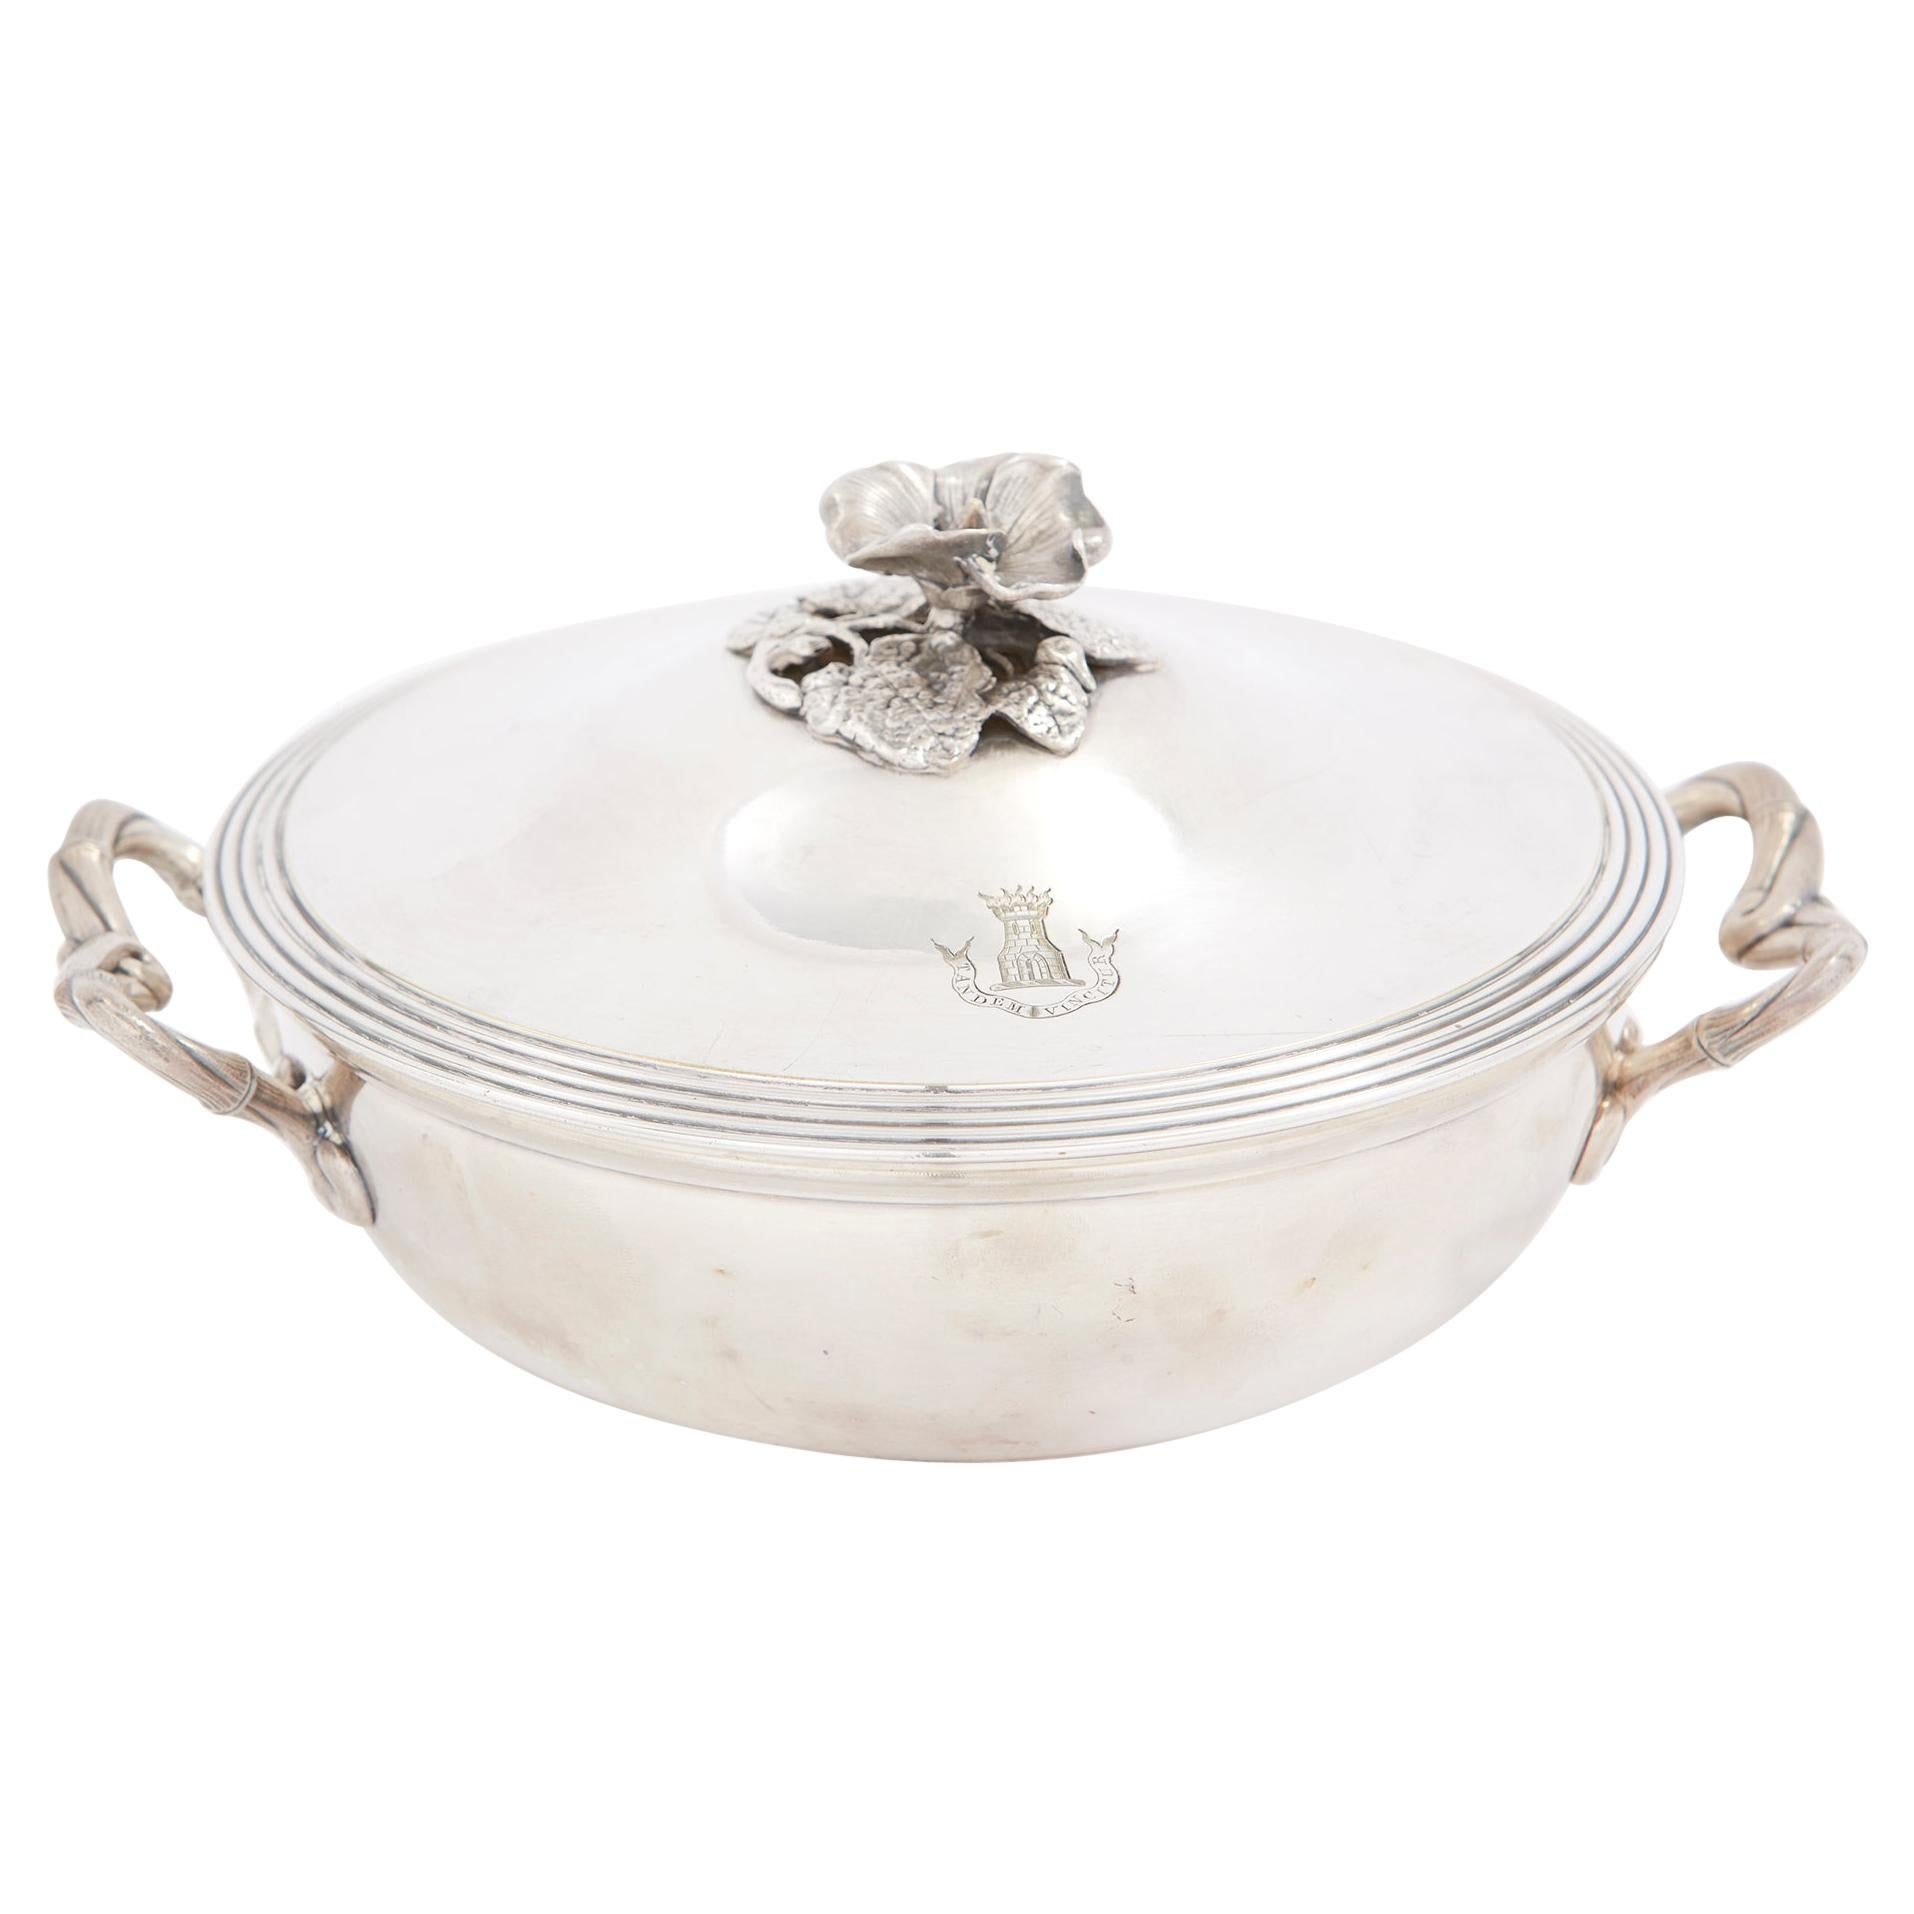 Elegant / Refined French Silver Covered Dish